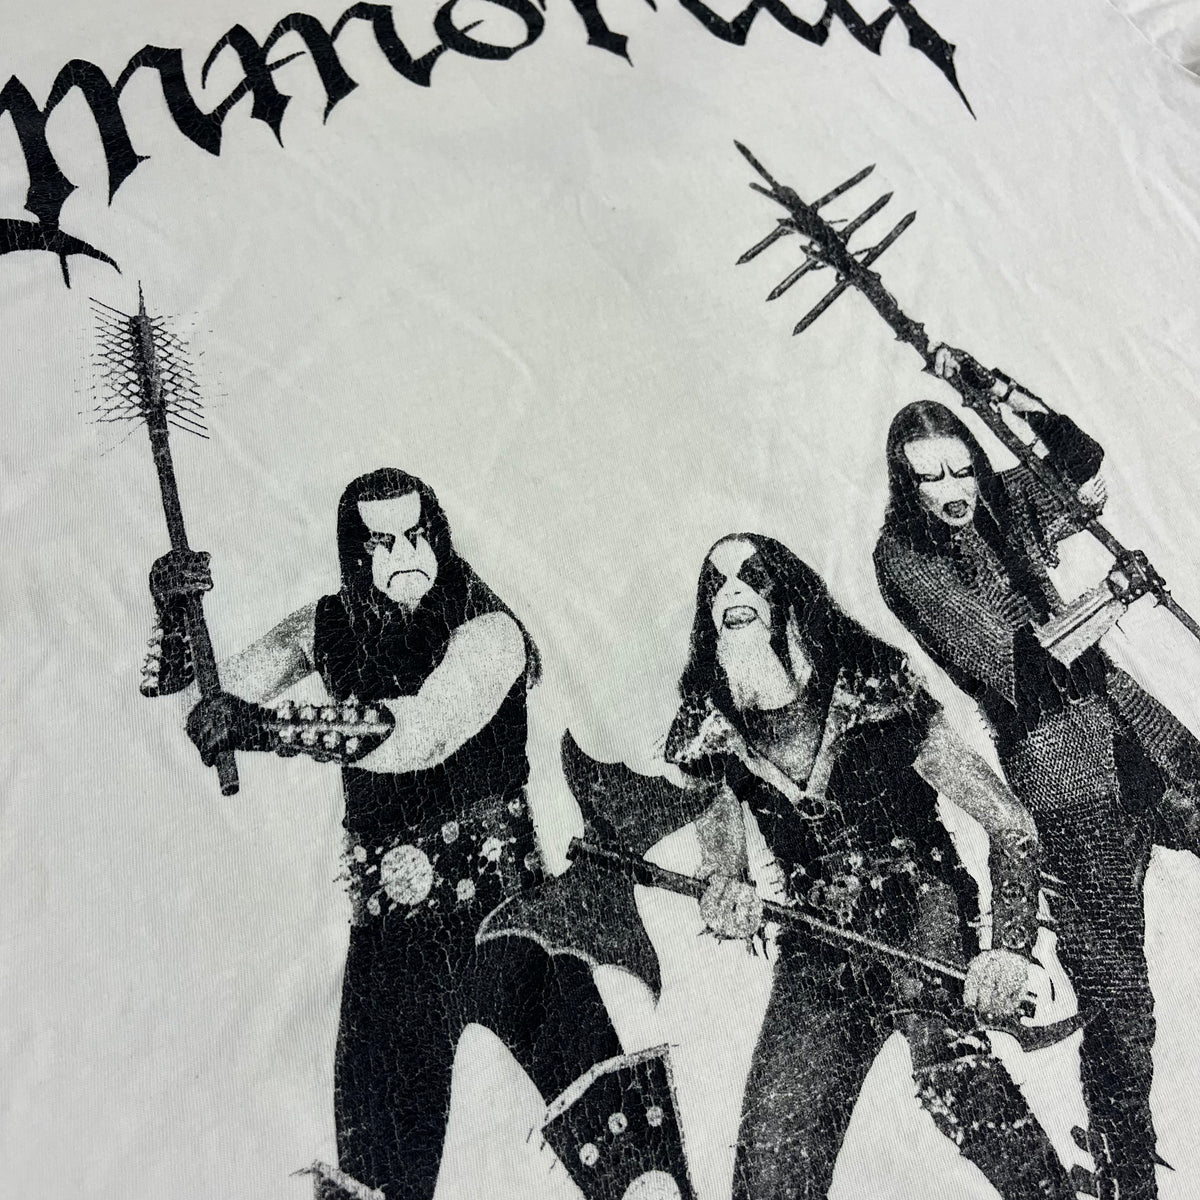 Vintage Immortal &quot;Sons Of Northern Darkness&quot; T-Shirt